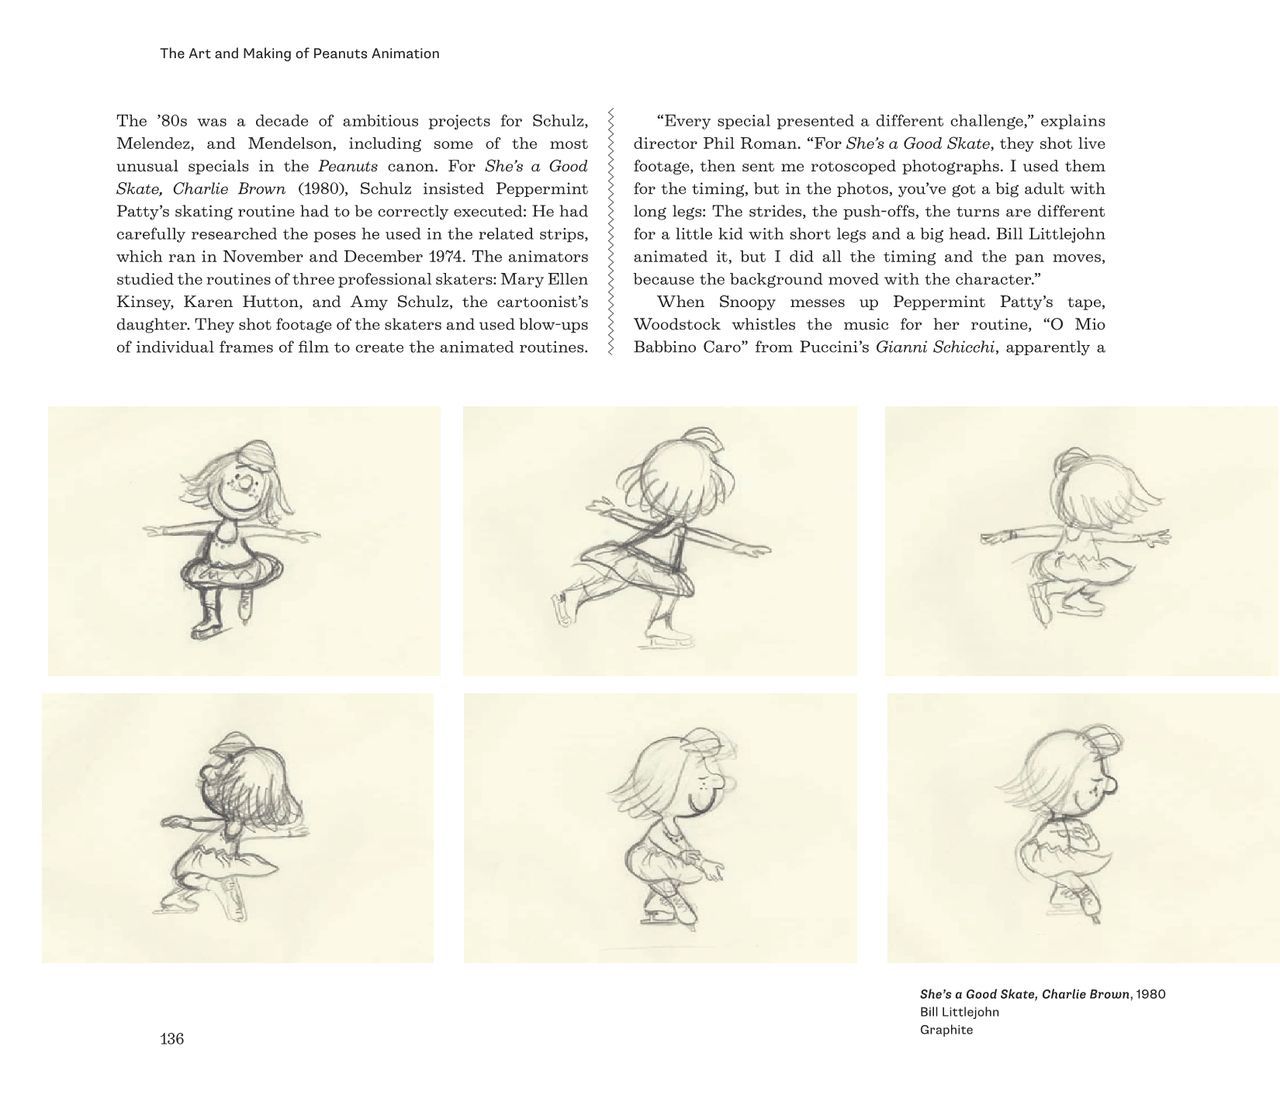 The Art and Making of Peanuts Animation 140